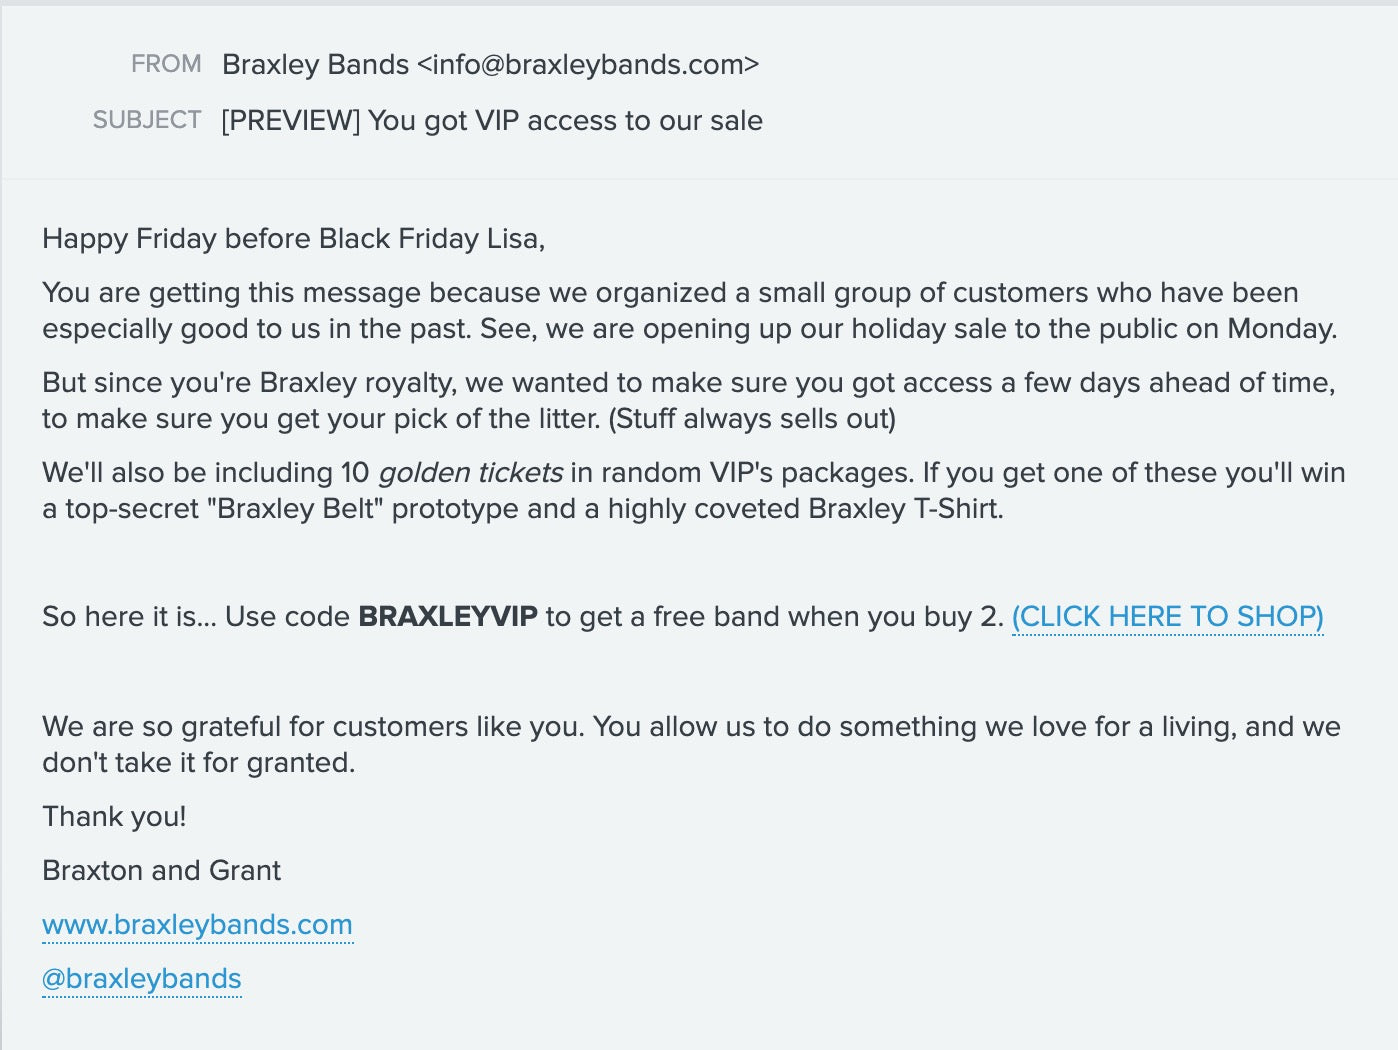 A plain text email from Braxley Bands that was sent to their loyal customers, offering them an early Black Friday deal